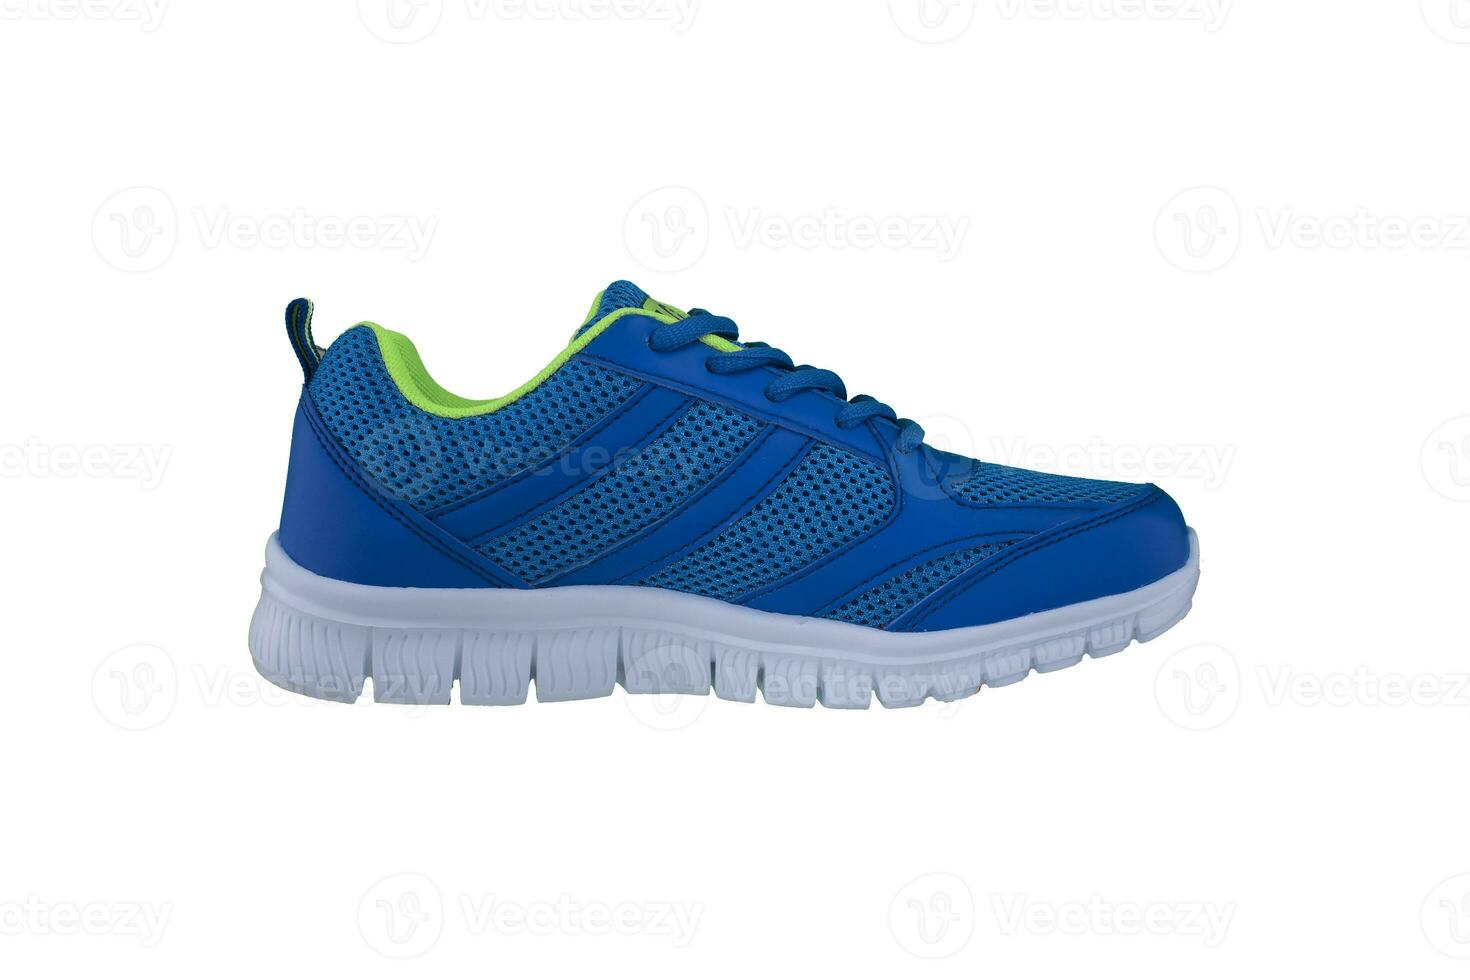 Sneakers. Blue sport shoes side view photo